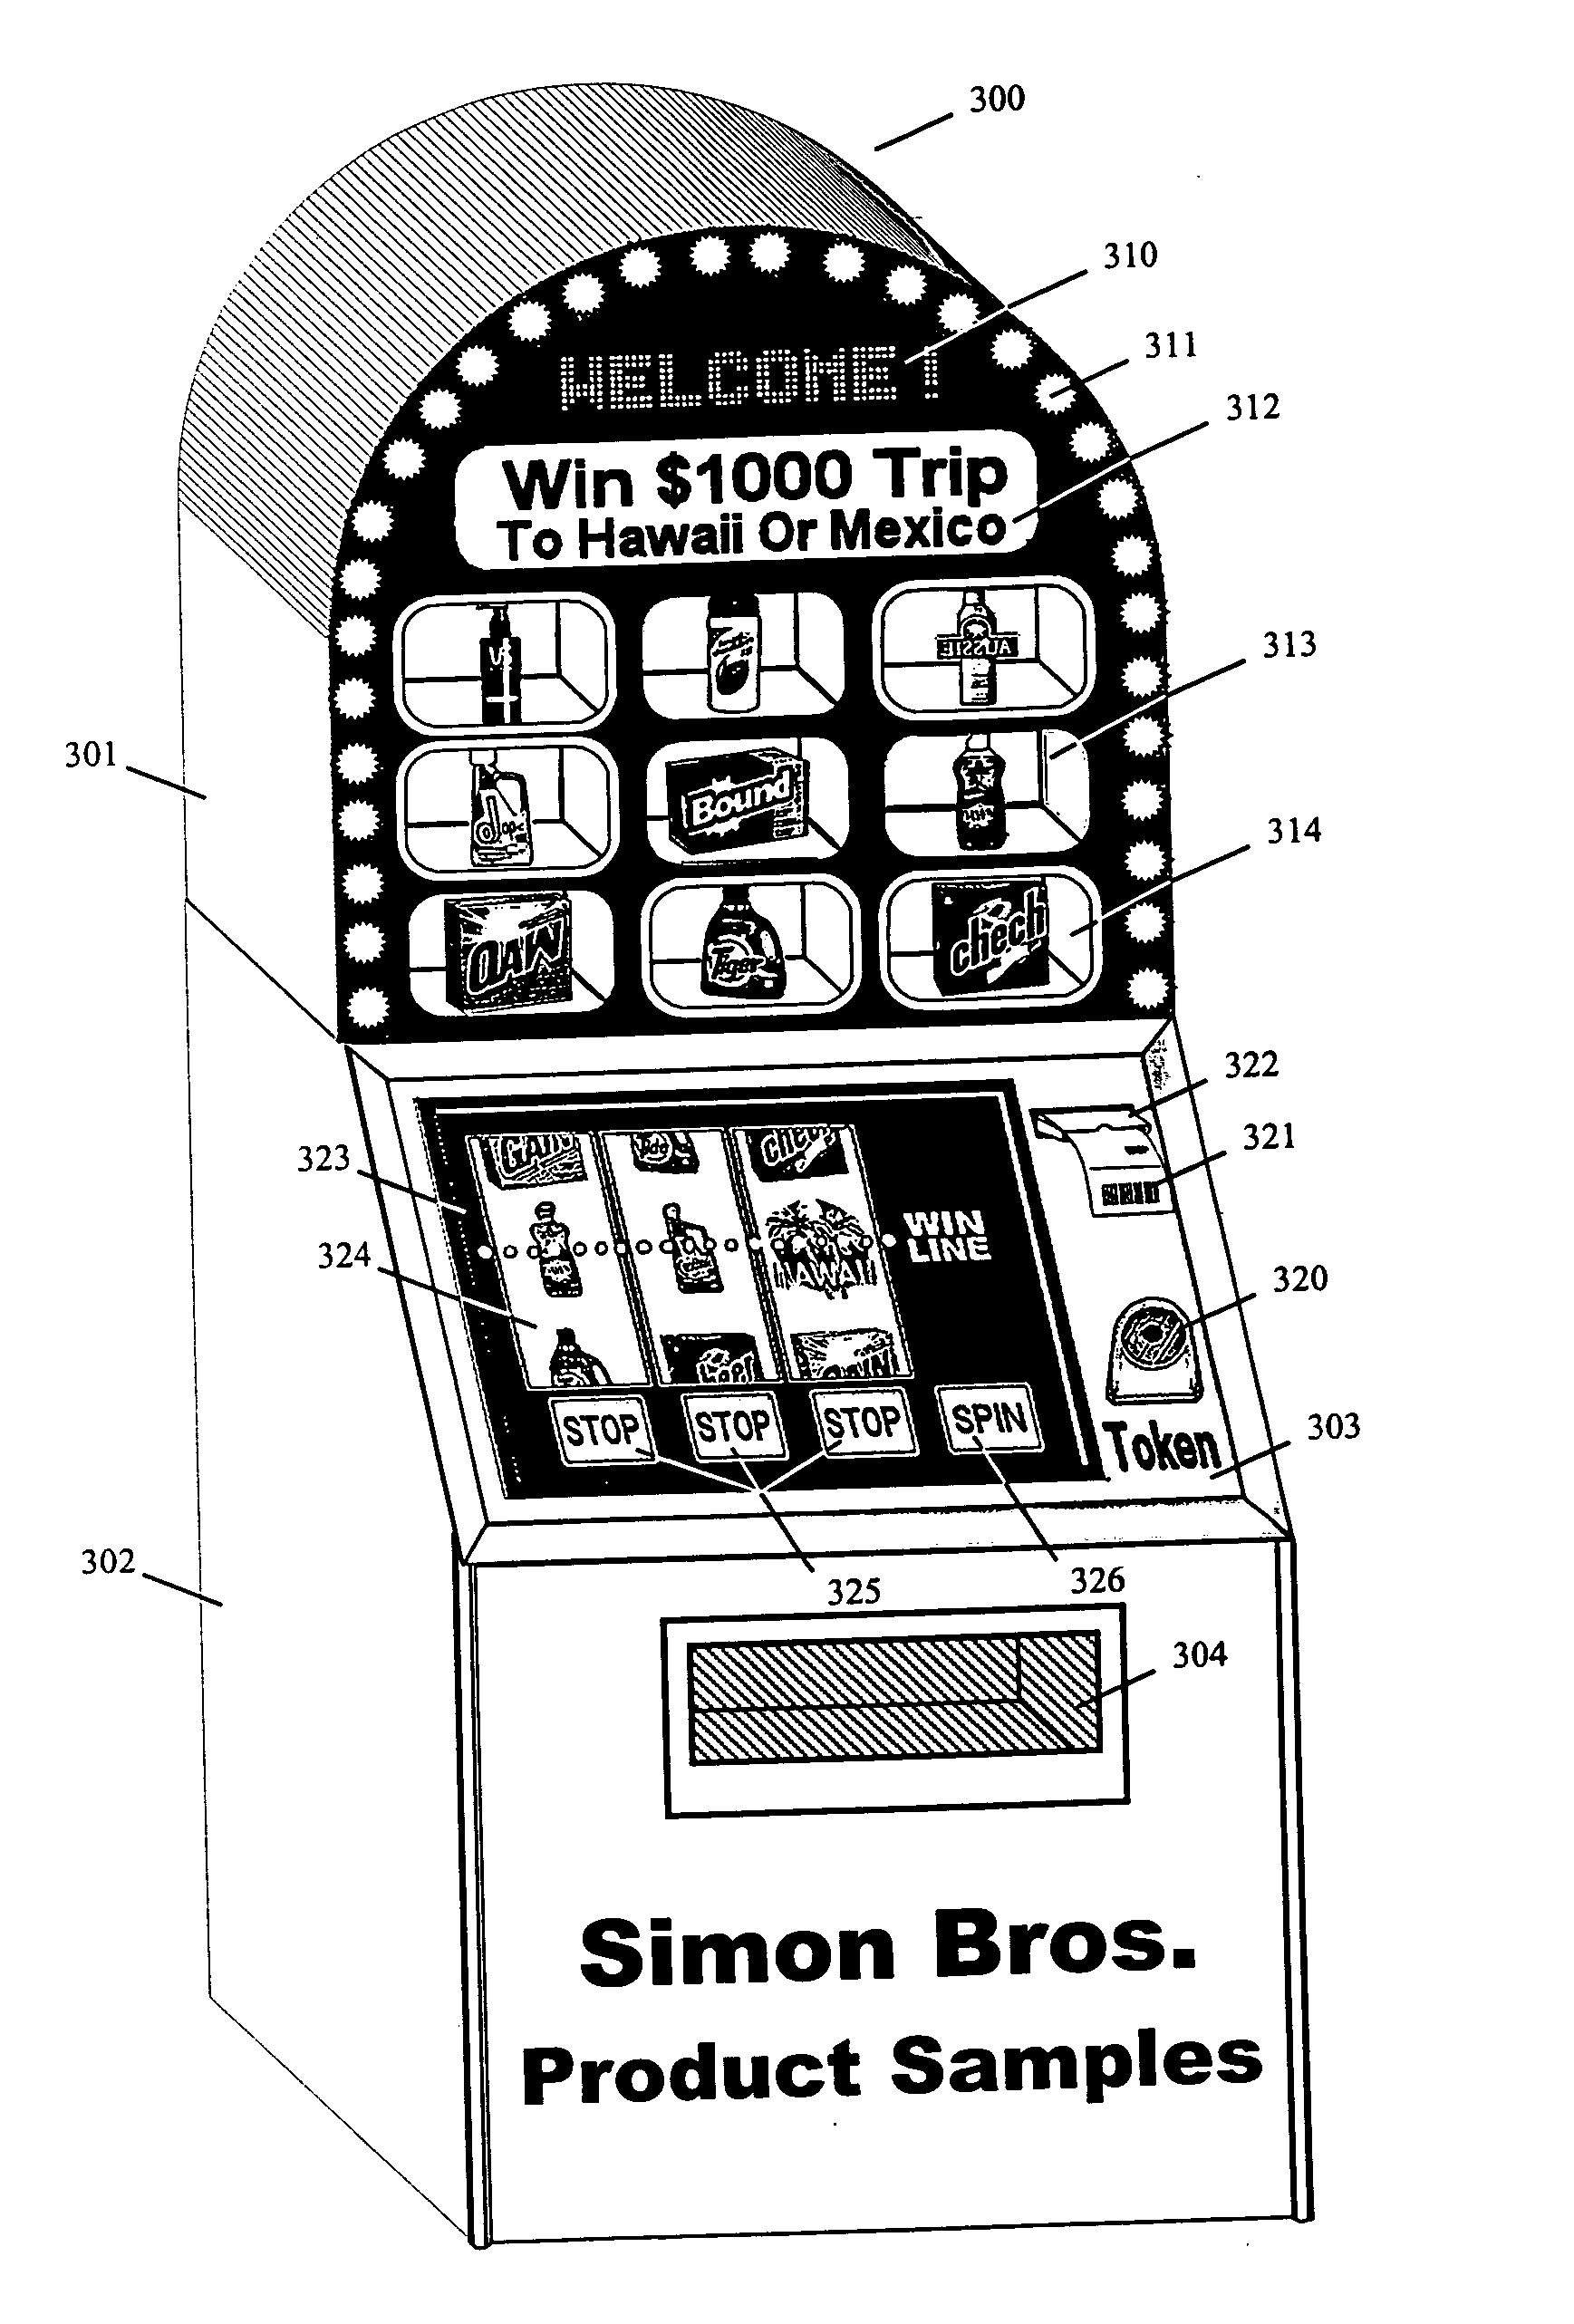 Vending machine having a game of chance